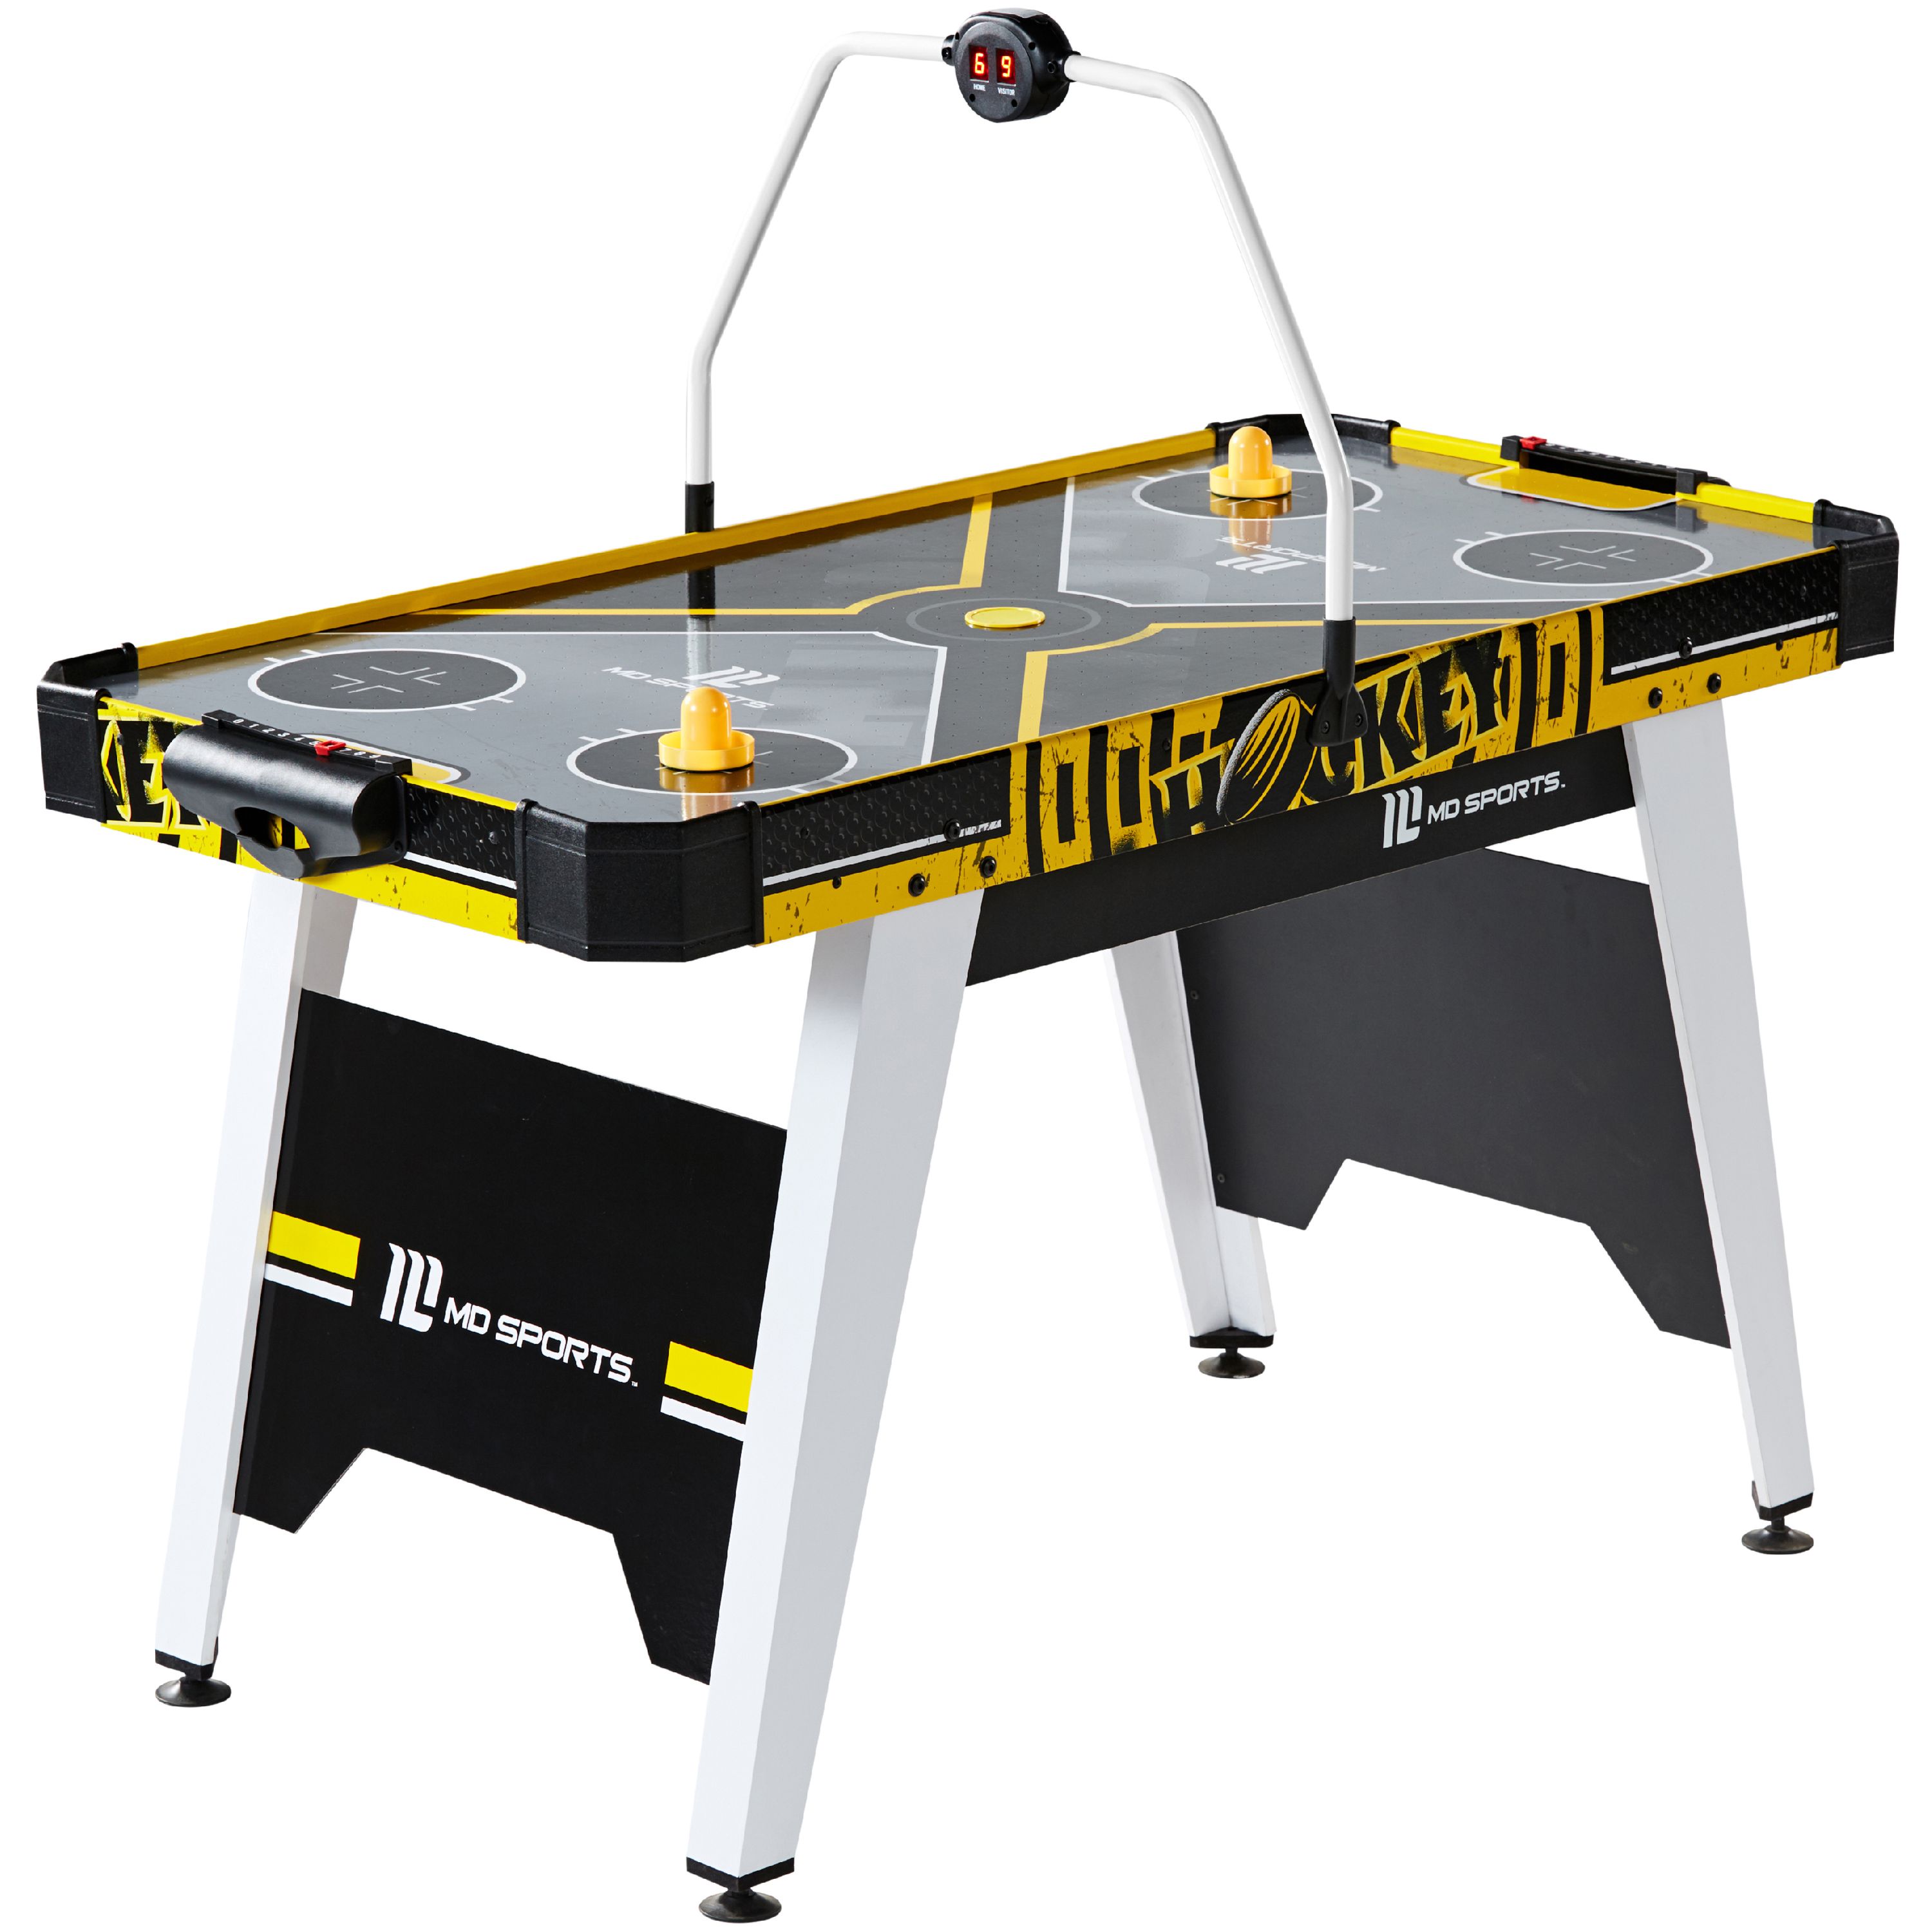 MD Sports Air Hockey Game Table, Overhead Electronic Scorer, Black/Yellow, 54" x 27" x 32" - image 1 of 10